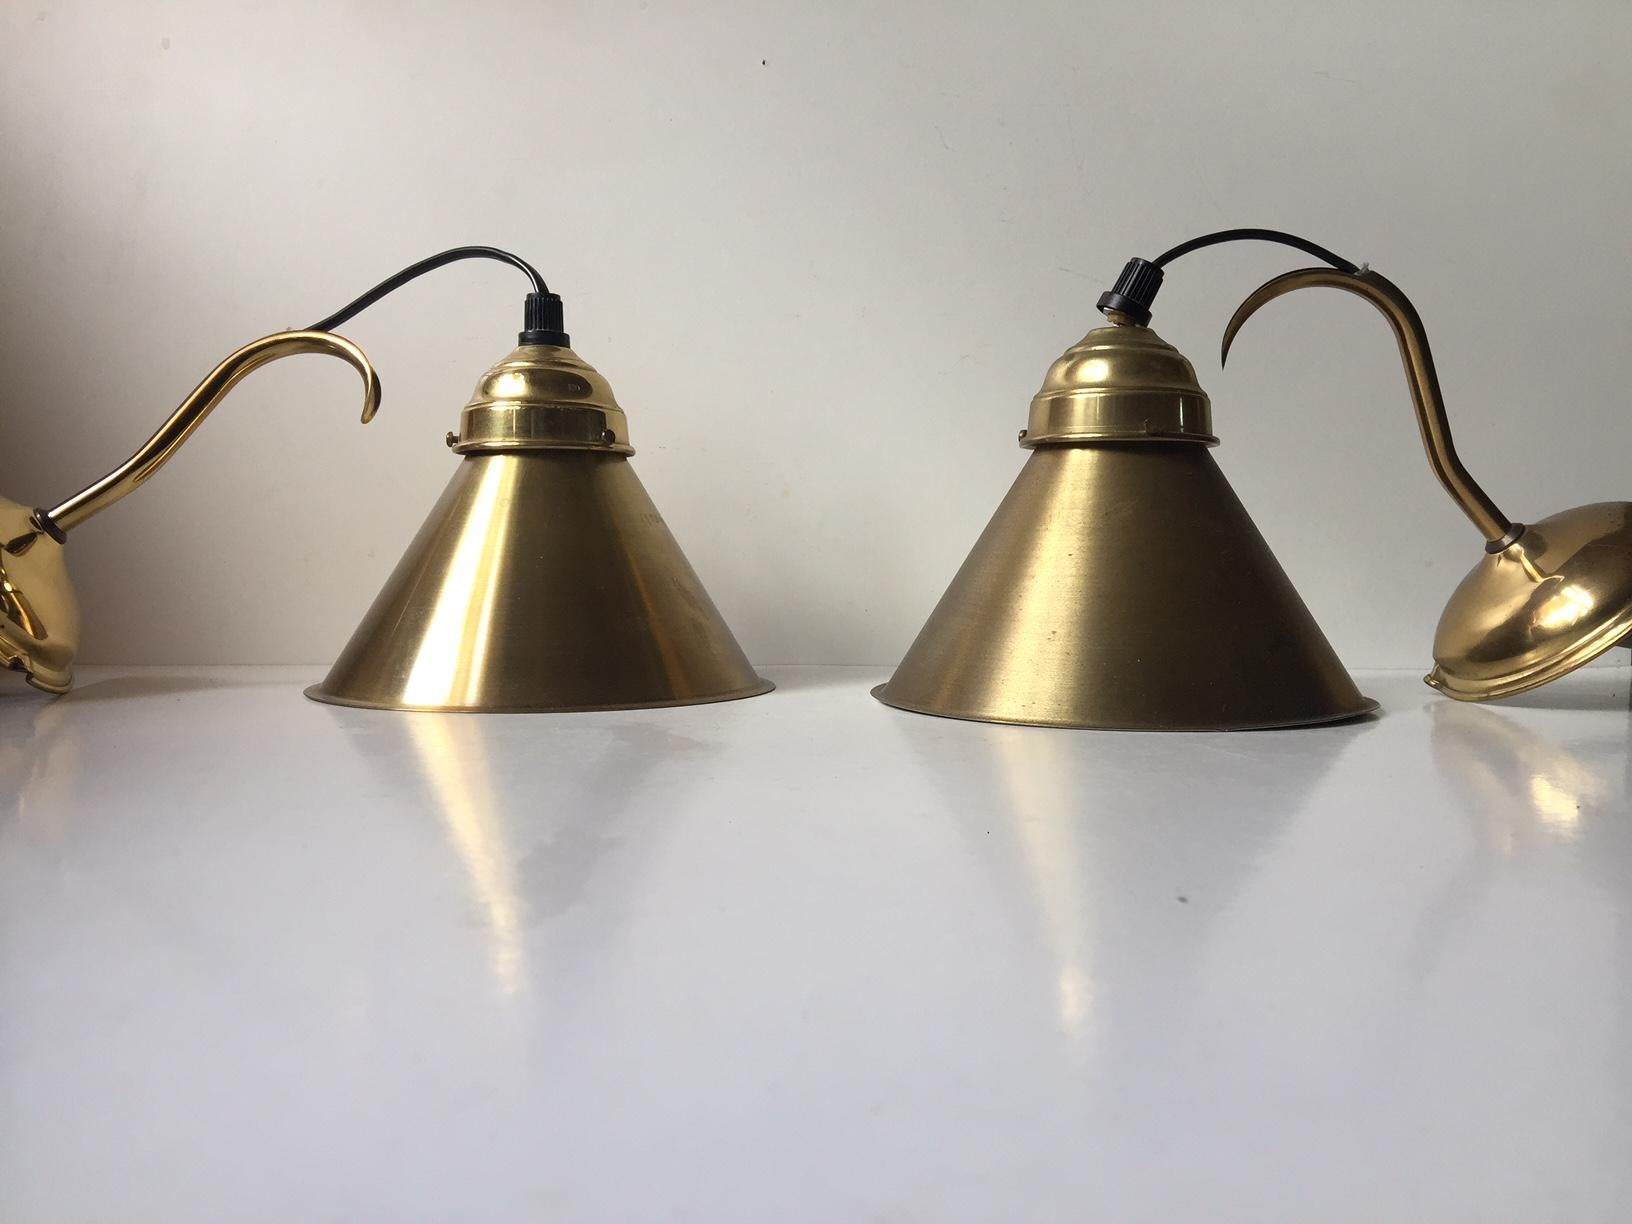 A pair of suspended wall lamps made from brass. They features loose hanging and height adjustable shades. Manufactured and designed by Danish Design, Giftline in Denmark during the 1970s.